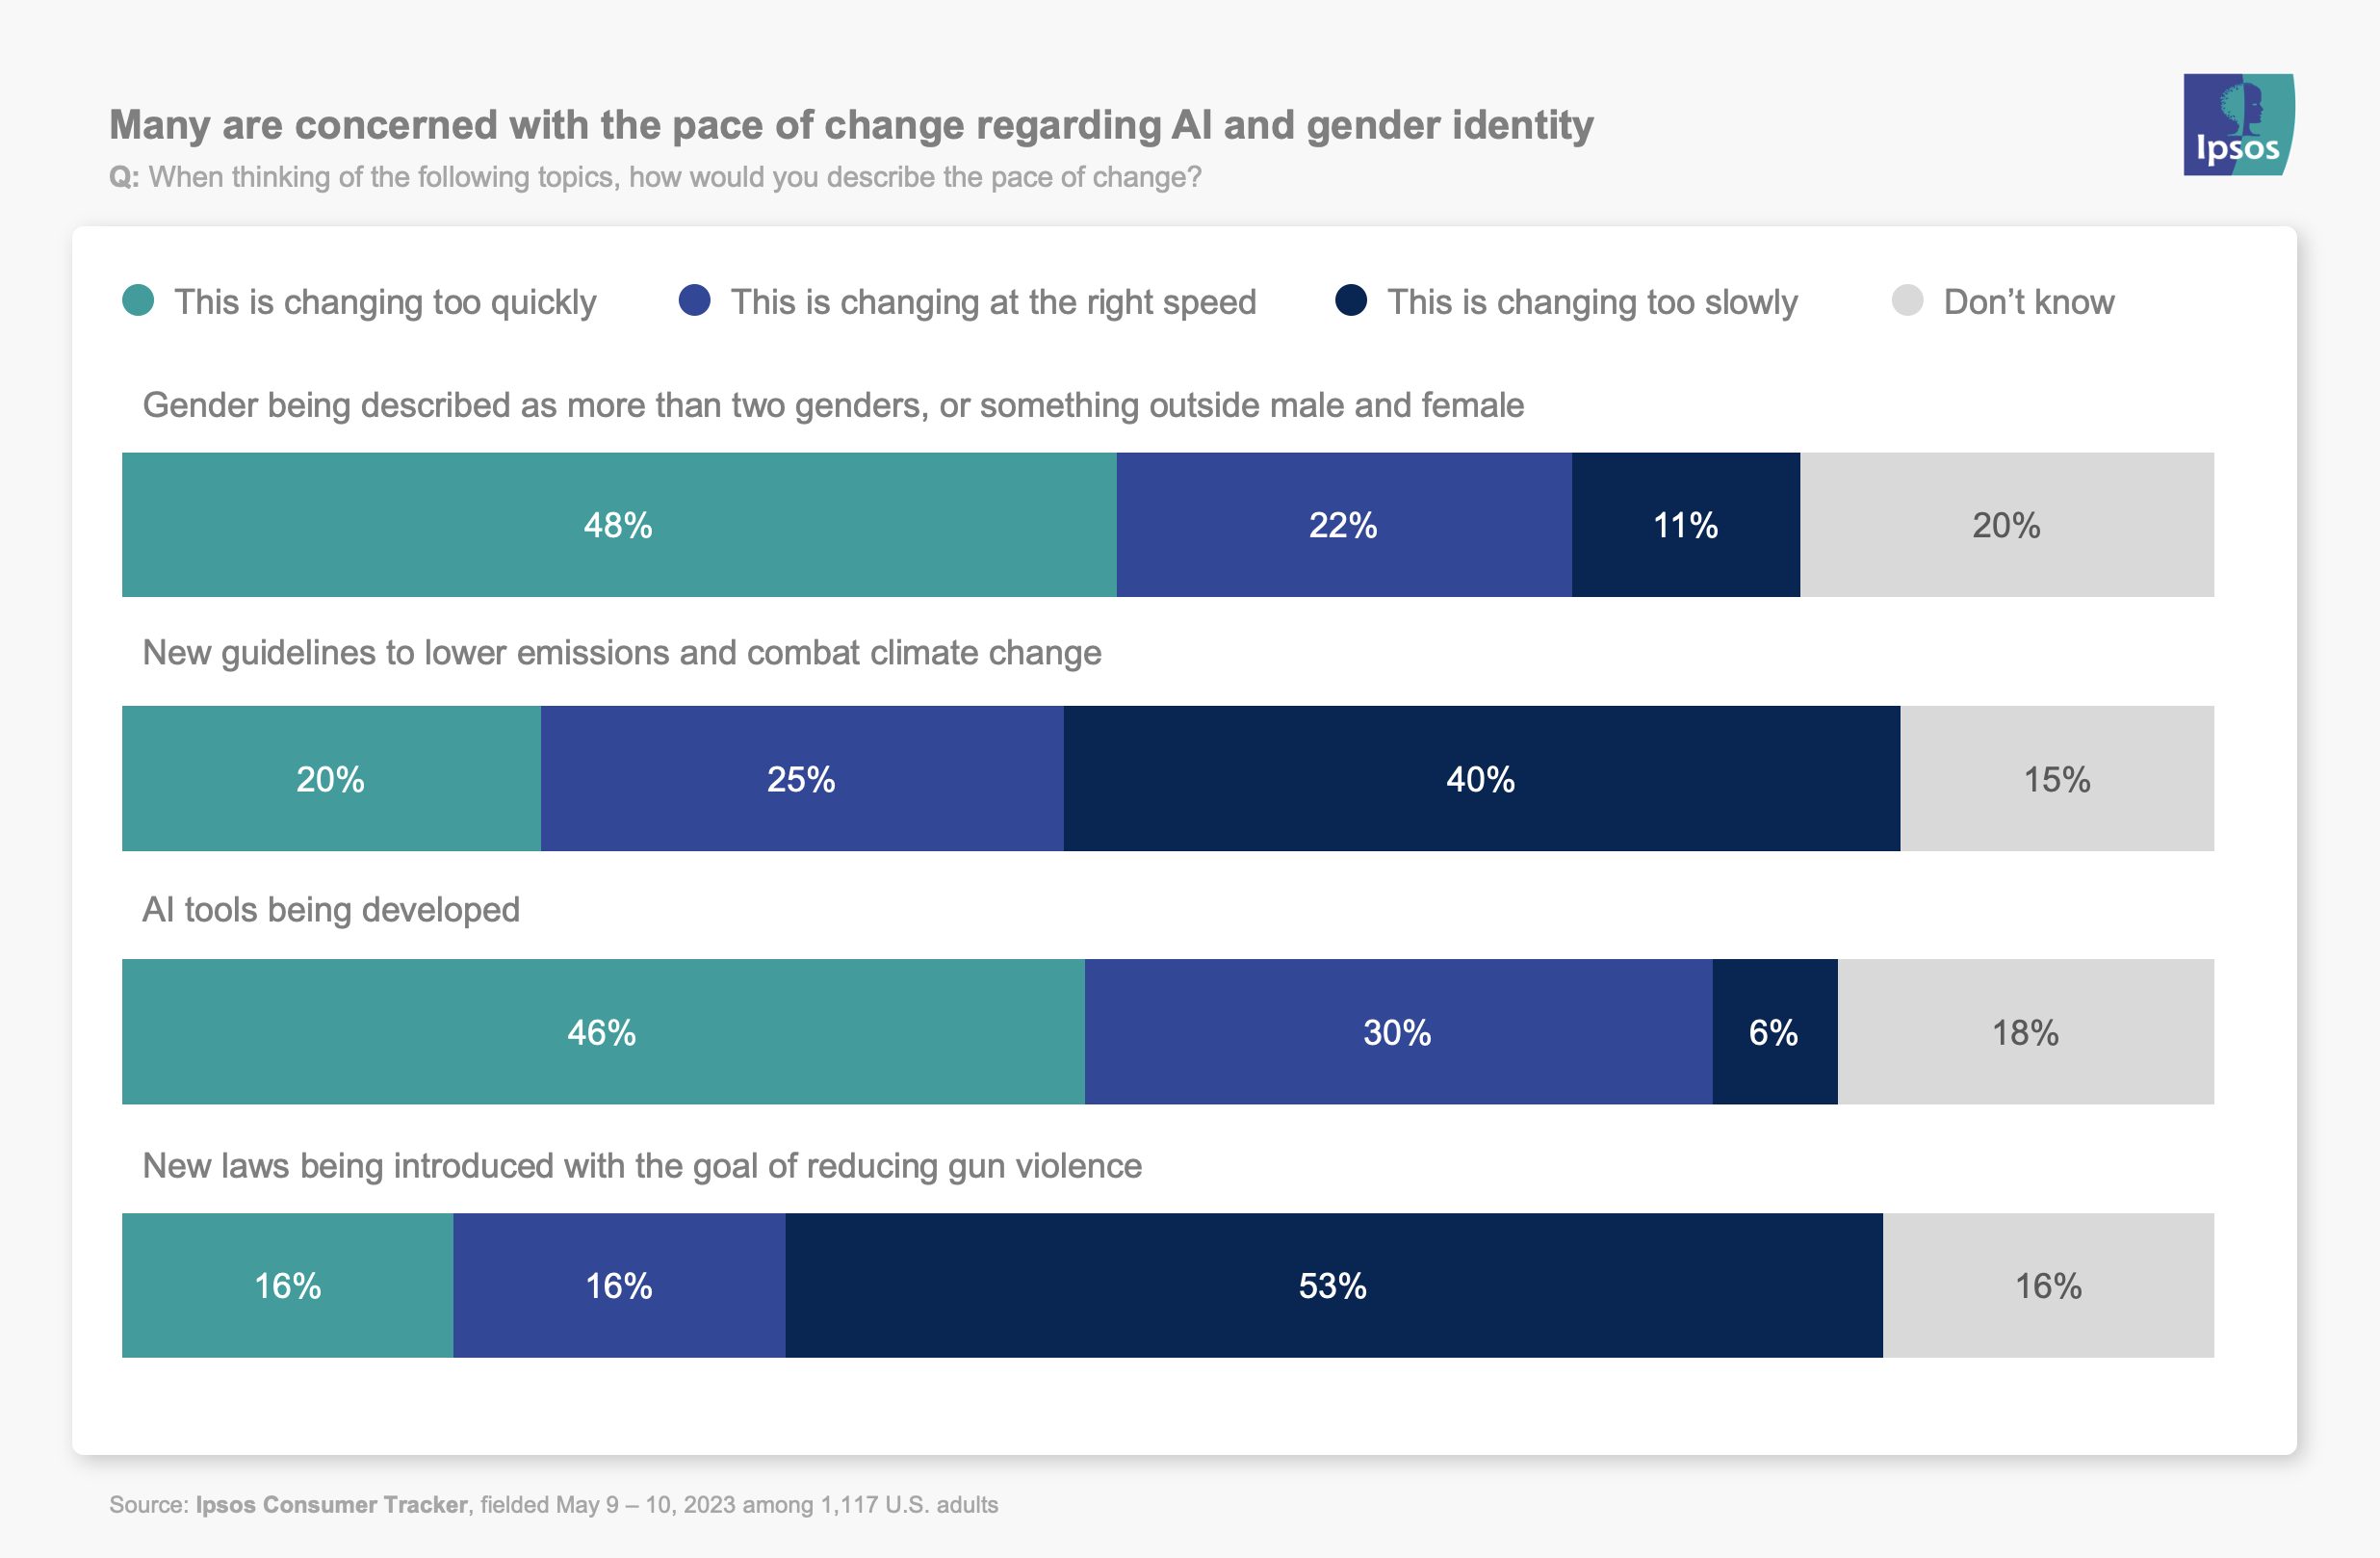 Many are concerned with the pace of change regarding Al and gender identity